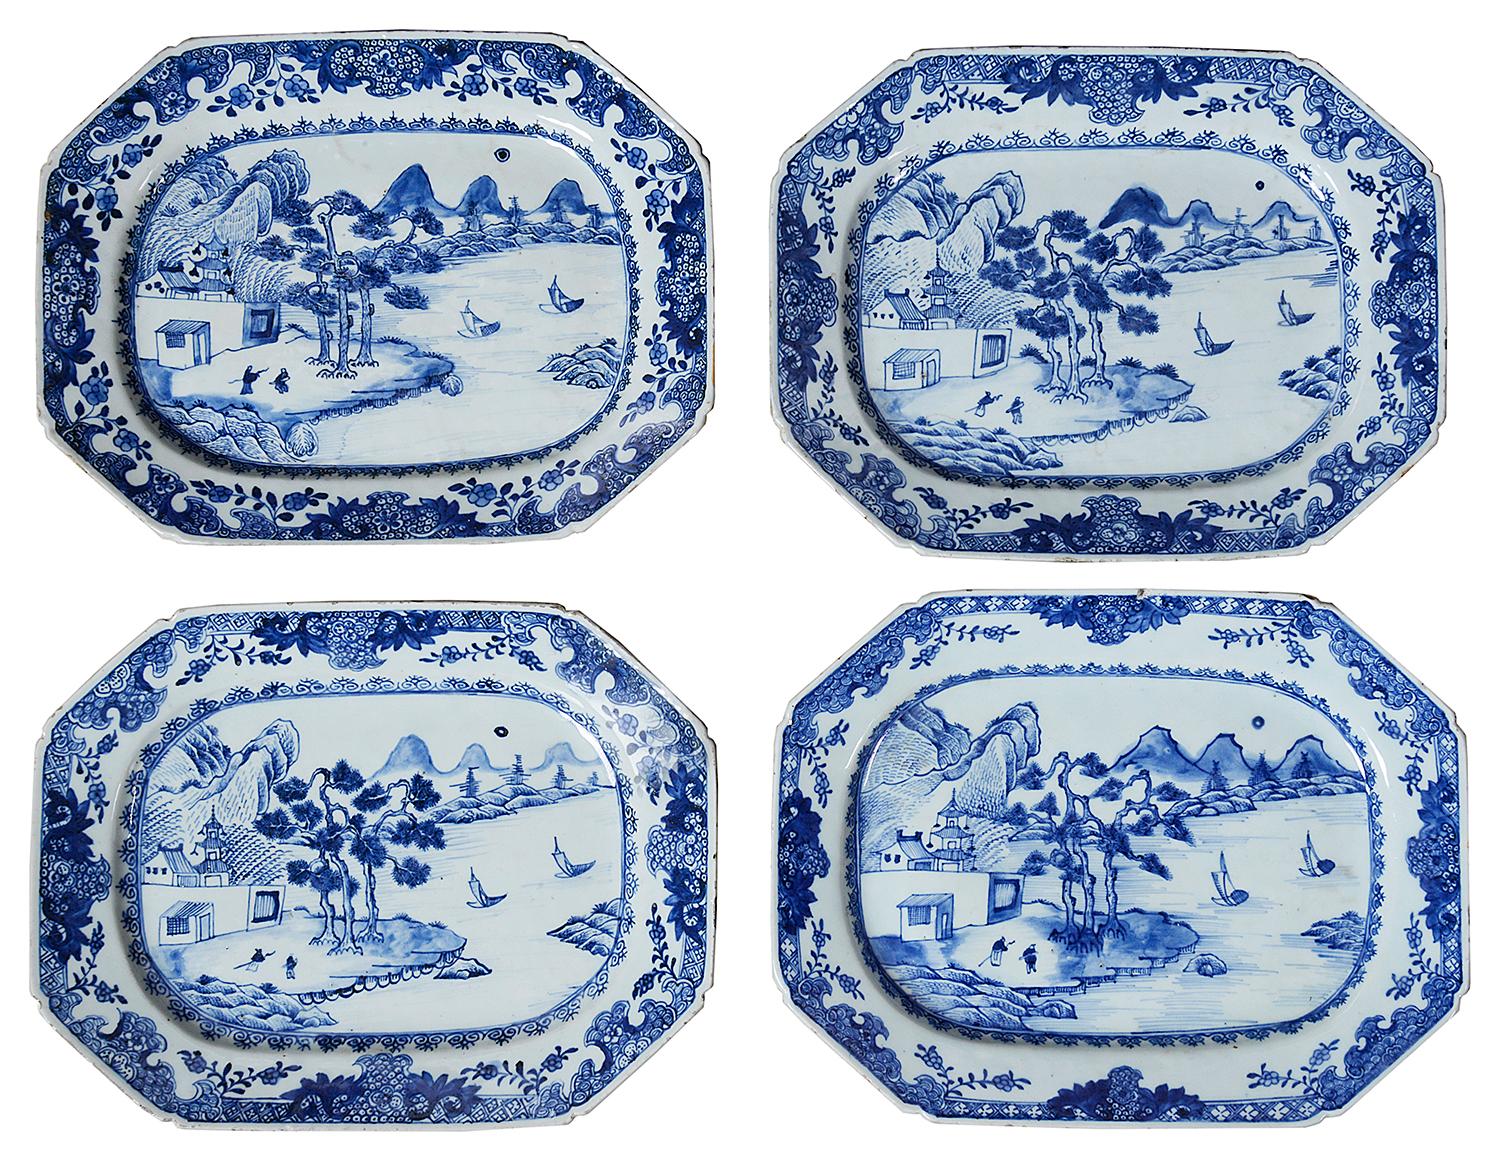 An impressive collection of twelve willow pattern Chinese 18th century Nanking blue and white plates, each depicting classical Chinese scenes of lakes, boats, mountains and pagoda topped buildings.
Measures: Largest plate 41cm x 33cm
Smallest